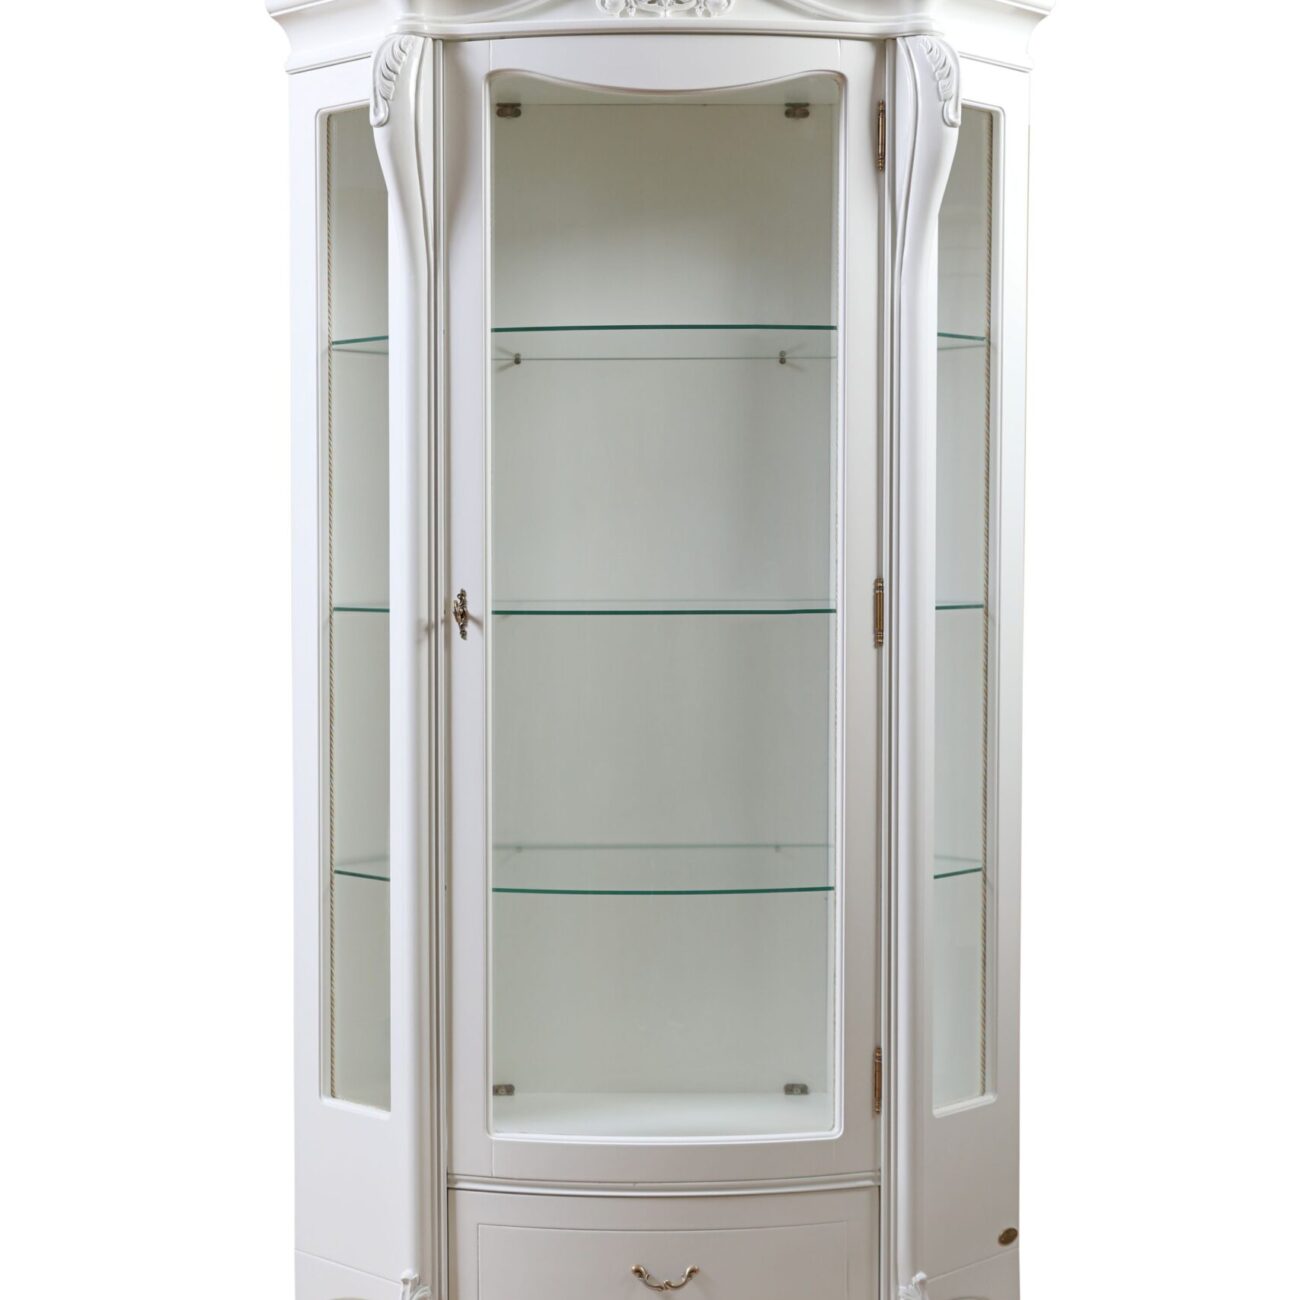 Cristalier-Colt-Anabell-1-scaled-1300x1300